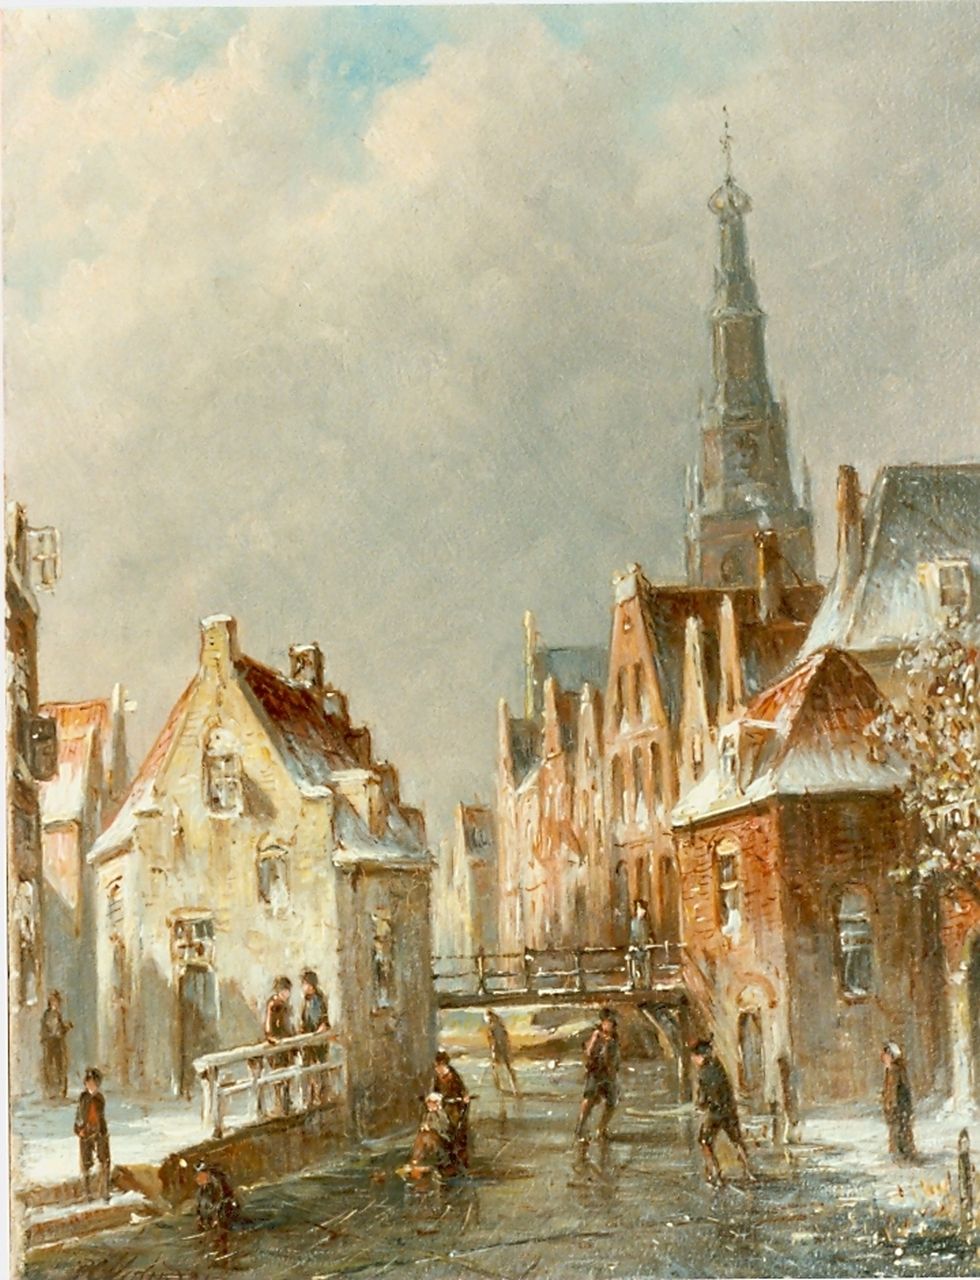 Vertin P.G.  | Petrus Gerardus Vertin, Canal with skaters, oil on panel 24.0 x 19.4 cm, signed l.l.